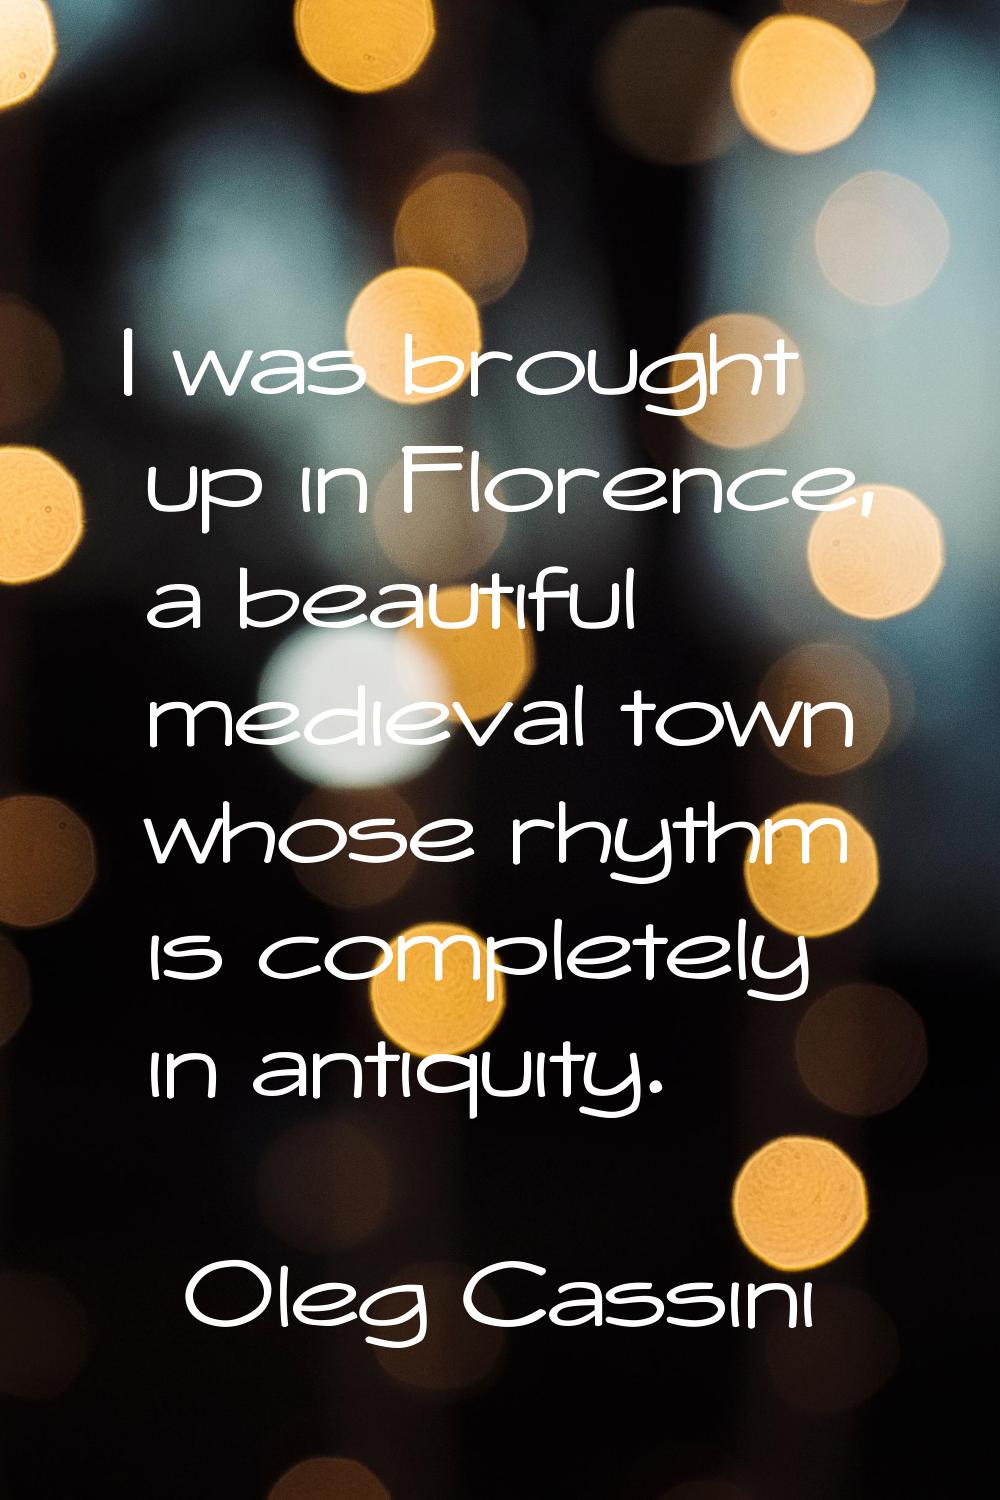 I was brought up in Florence, a beautiful medieval town whose rhythm is completely in antiquity.